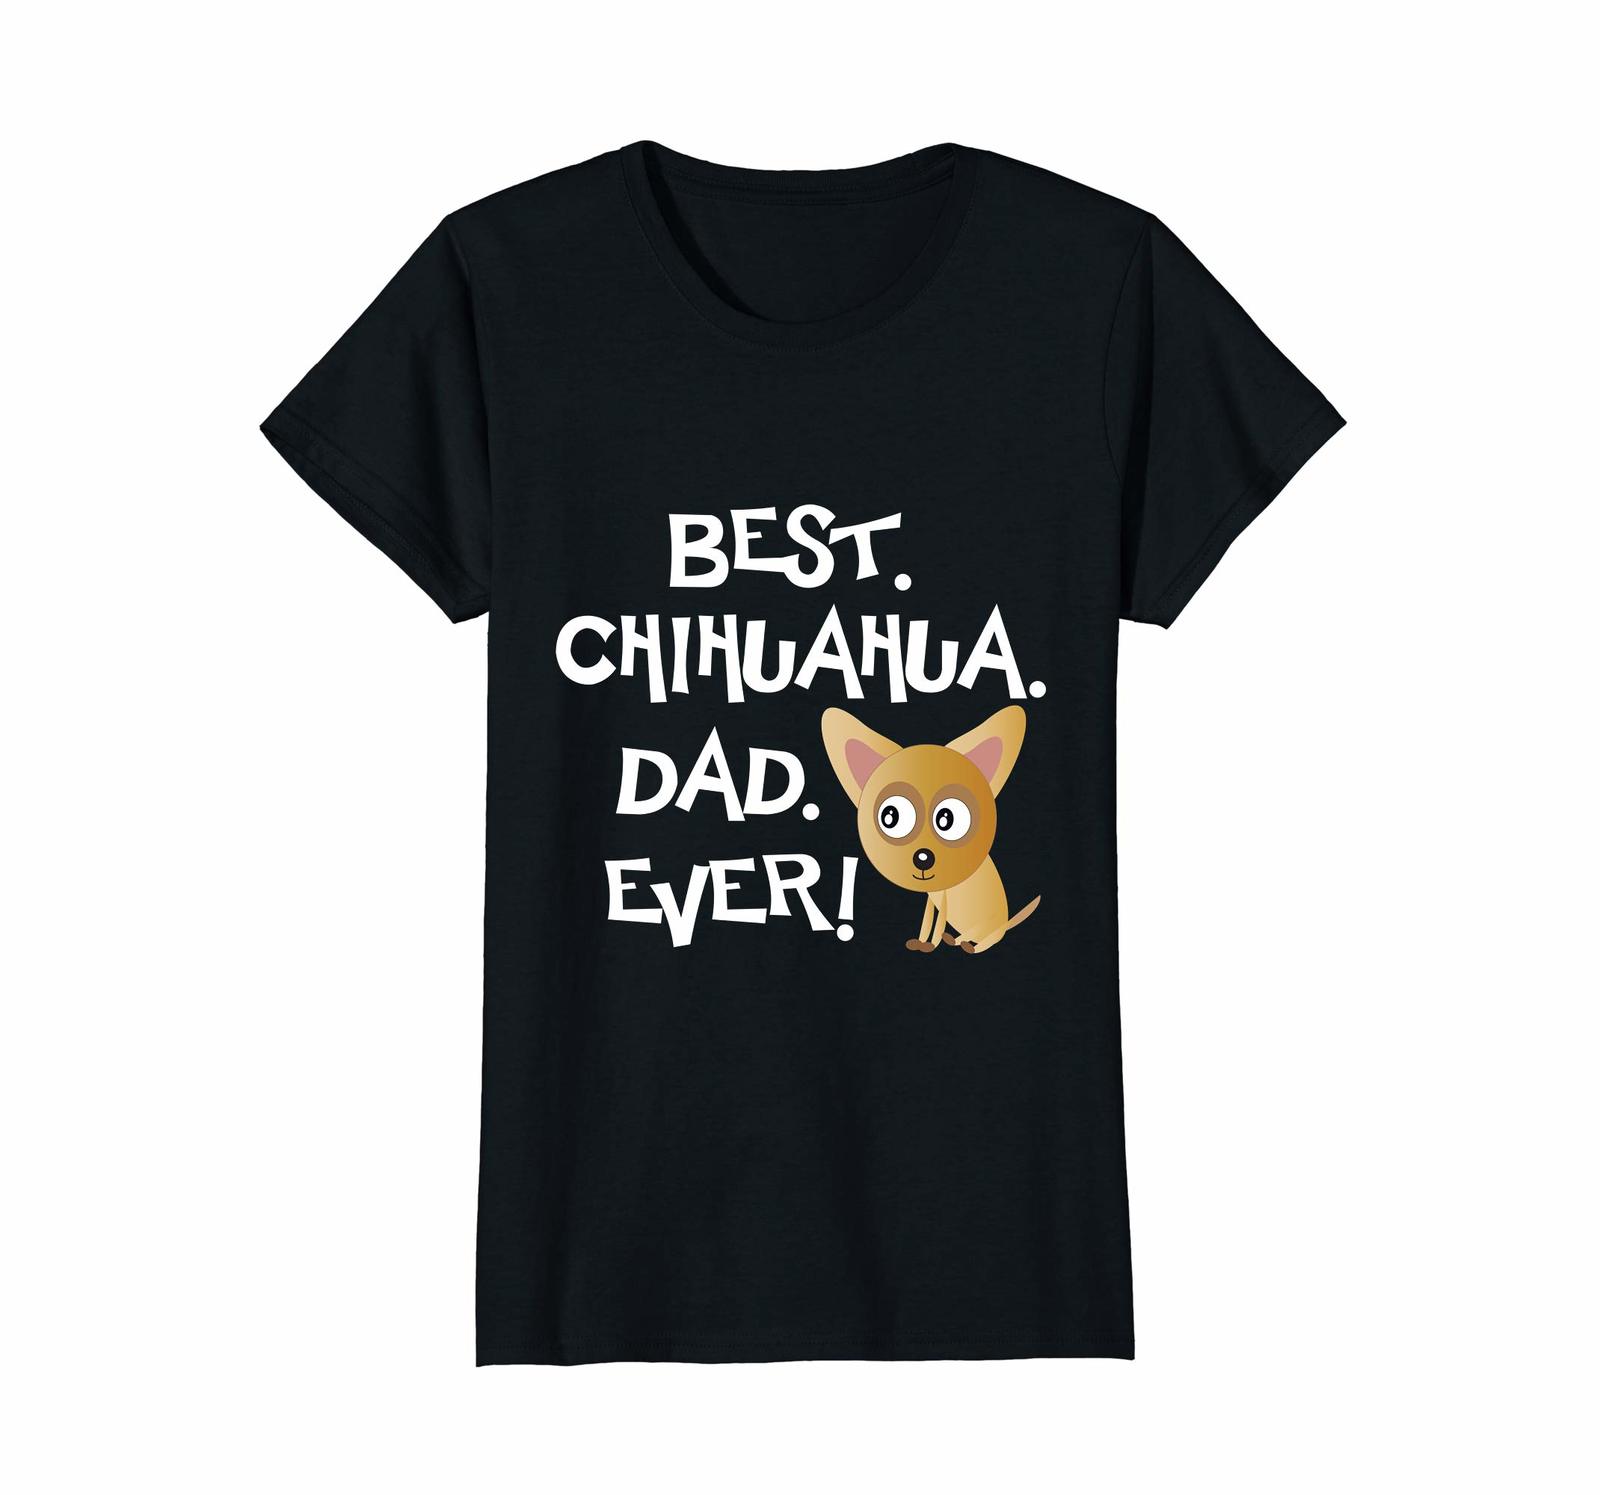 Dog Fashion - Best Chihuahua Dad Ever Tee Shirt Fathers Day Gift for Men Wowen